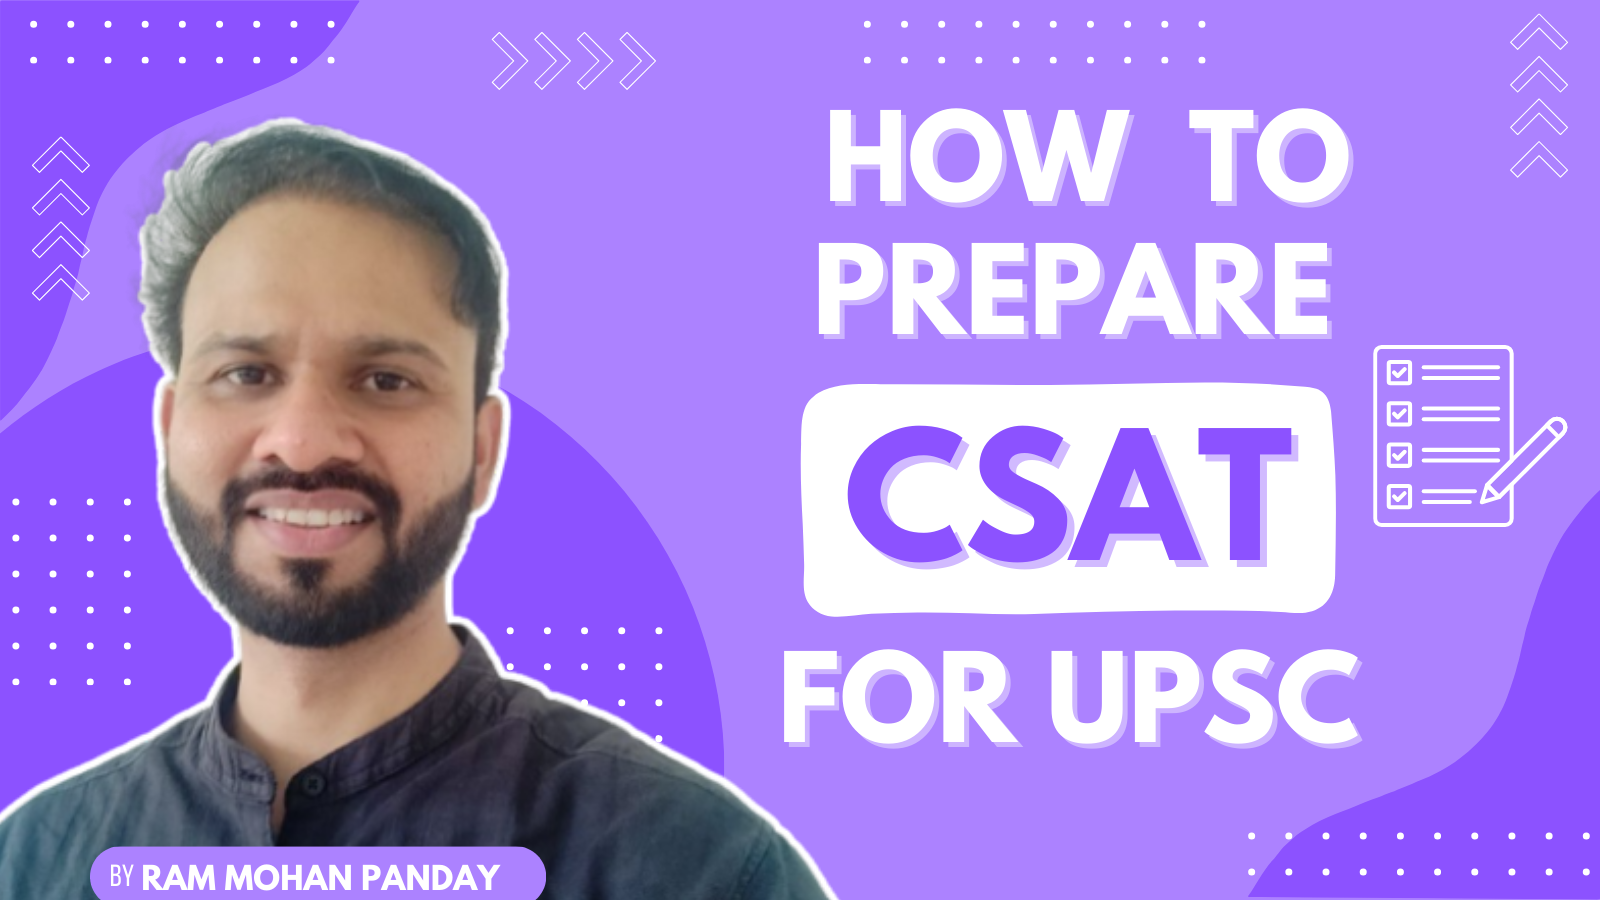 How To Prepare CSAT For UPSC